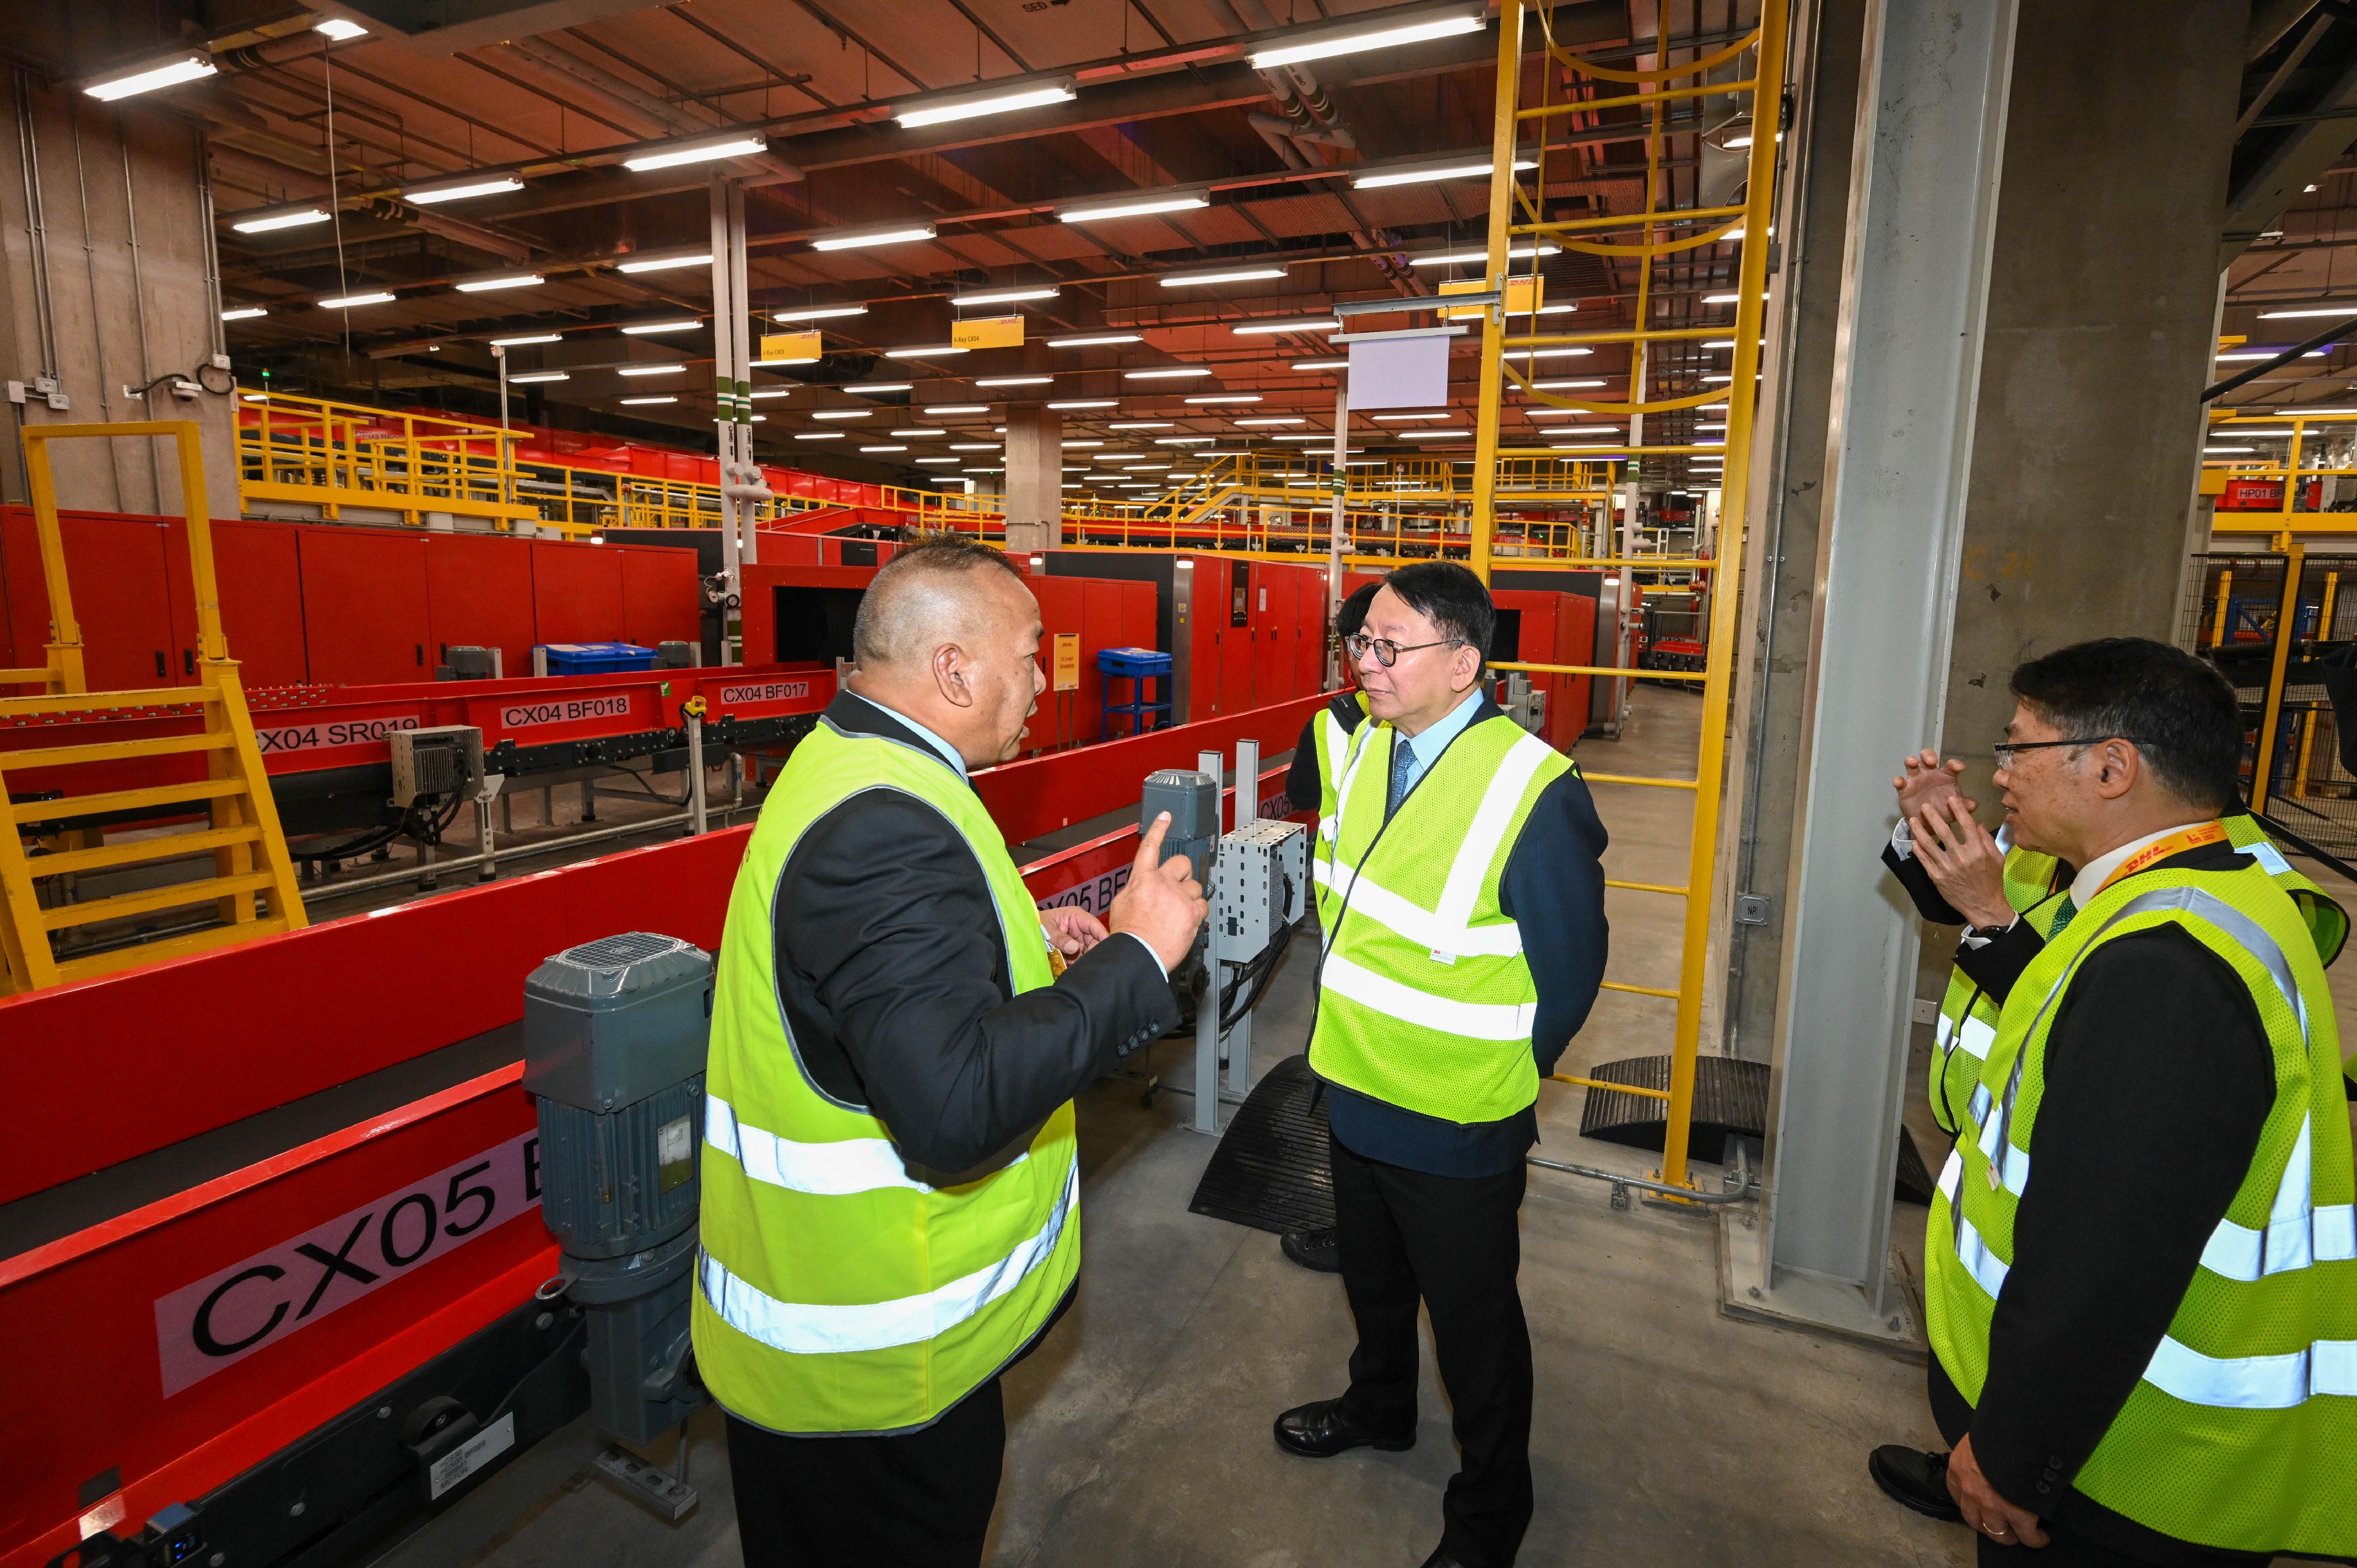 The Chief Secretary for Administration, Mr Chan Kwok-ki, attended the DHL Central Asia Hub Phase 3 Grand Opening today (November 14). Photo shows Mr Chan (second left) and the Secretary for Transport and Logistics, Mr Lam Sai-hung (first right), touring the expanded Central Asia Hub.